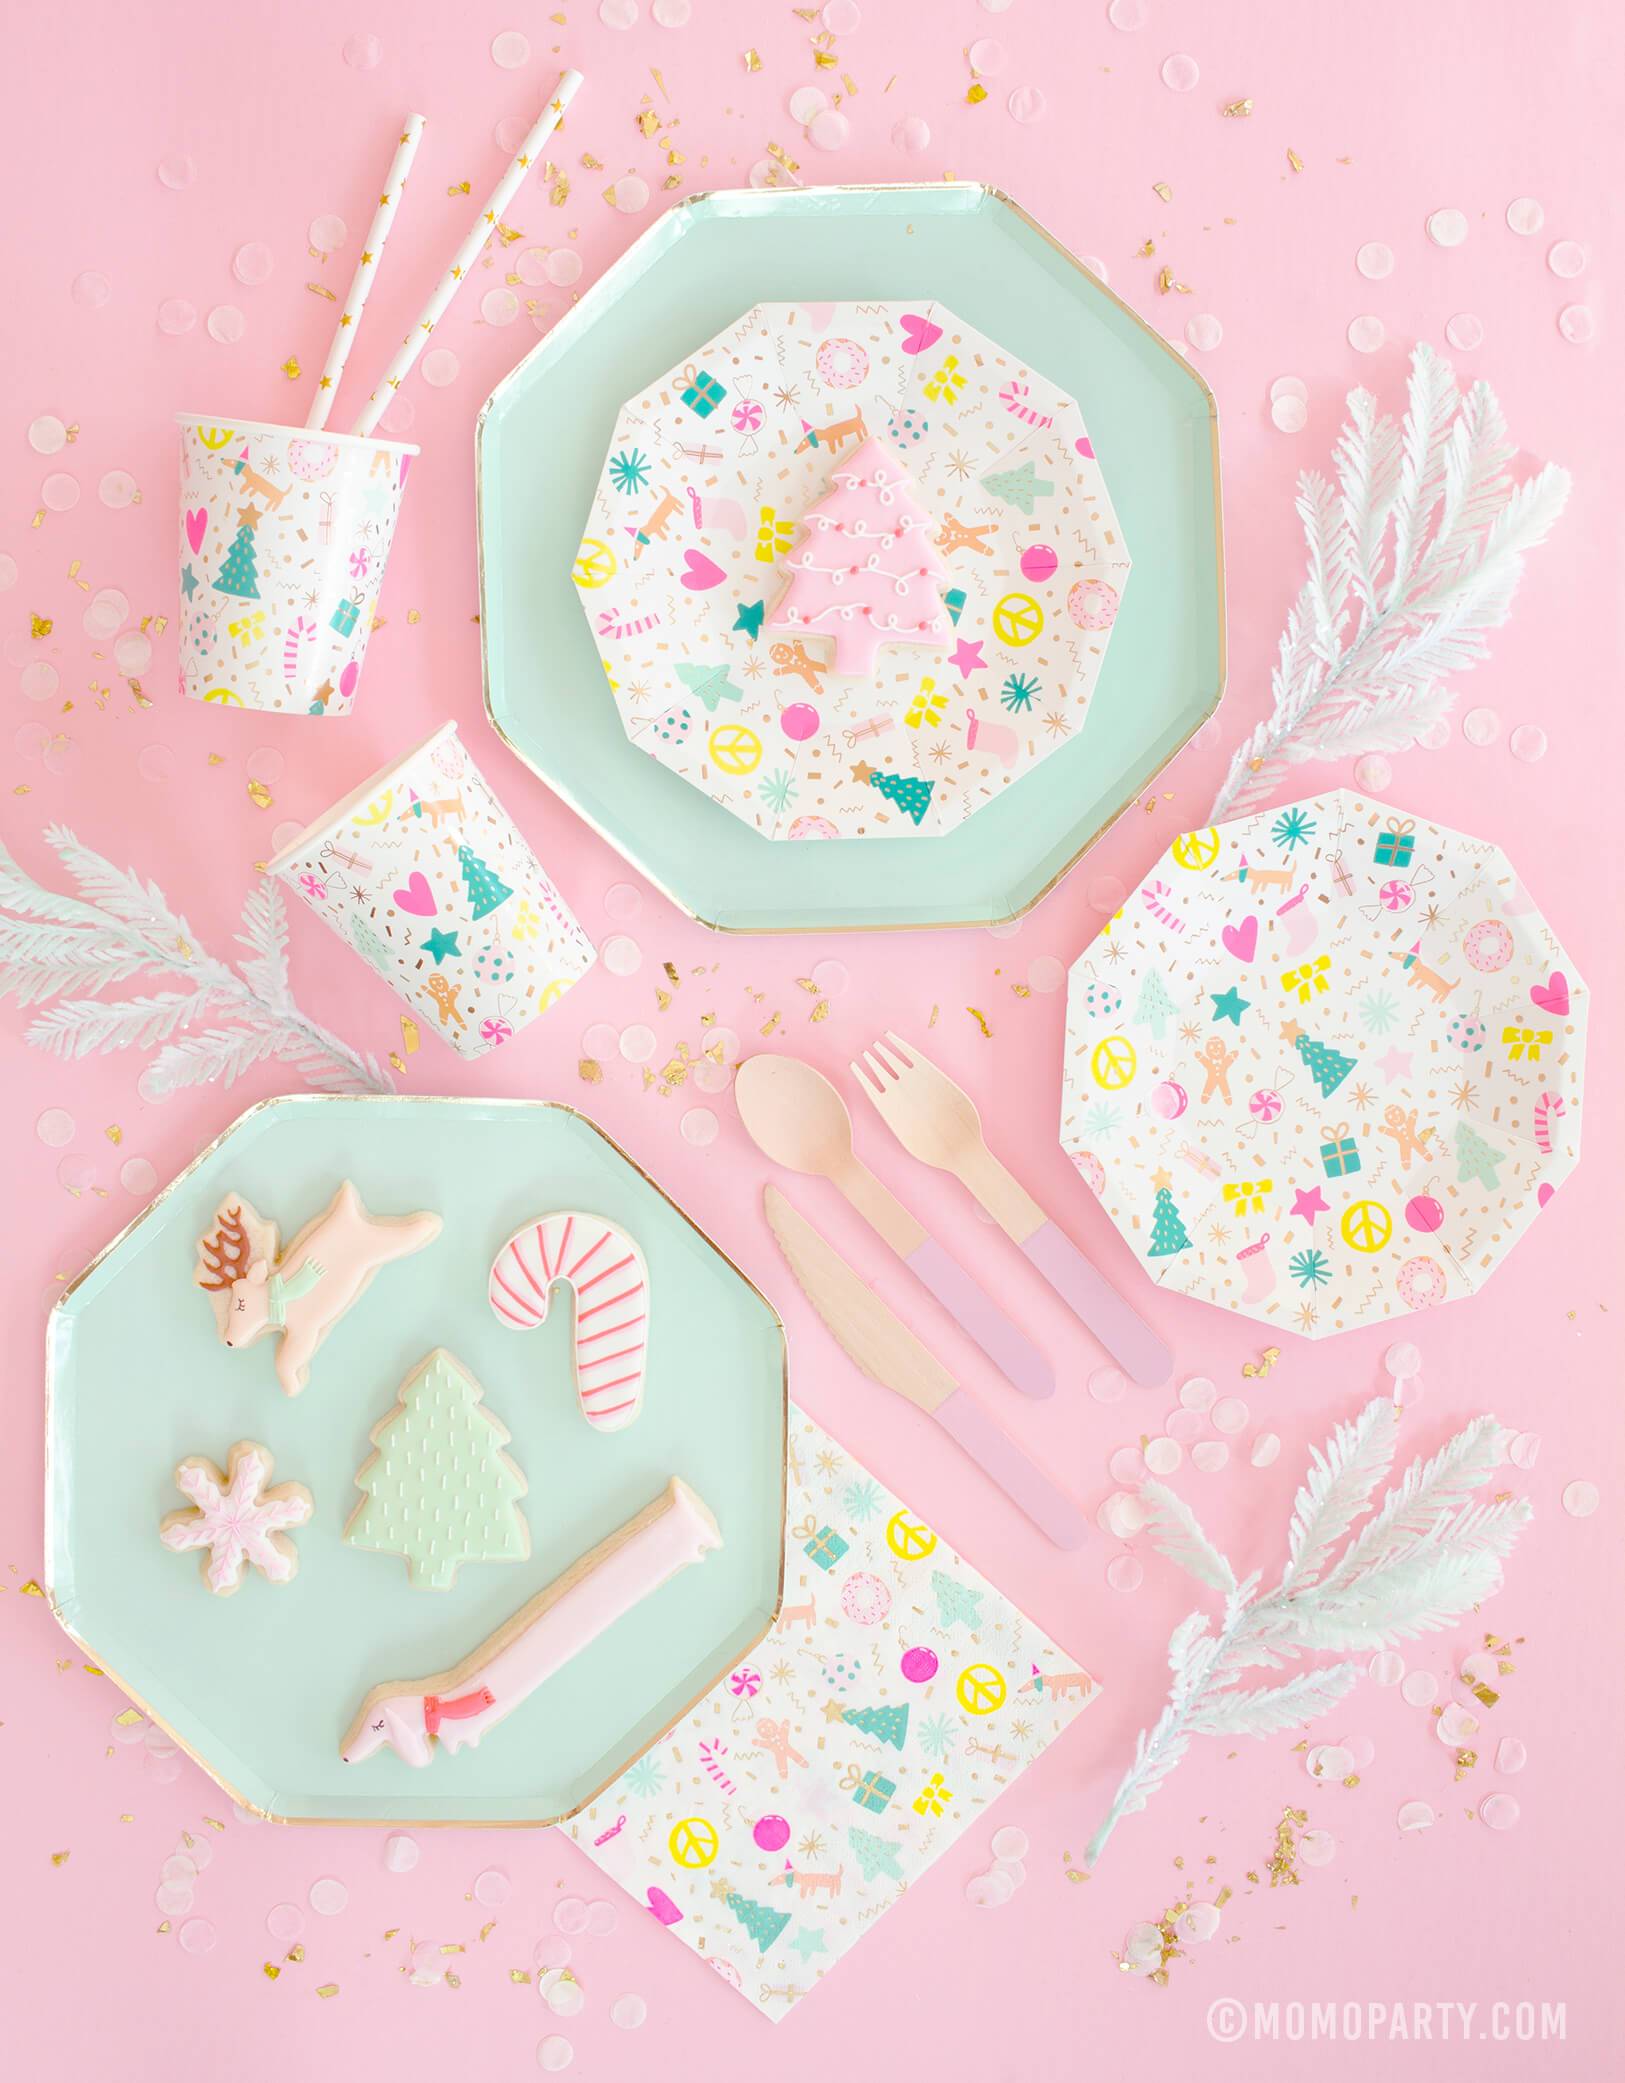 Meri Meri Mint Large Dinner Plates pair with Daydream Society Merry and Bright Holiday Christmas Party Plates,Napkins and Cups, Pink wooden utensils, Christmas themed cookies for a pastel Christmas party celebration    